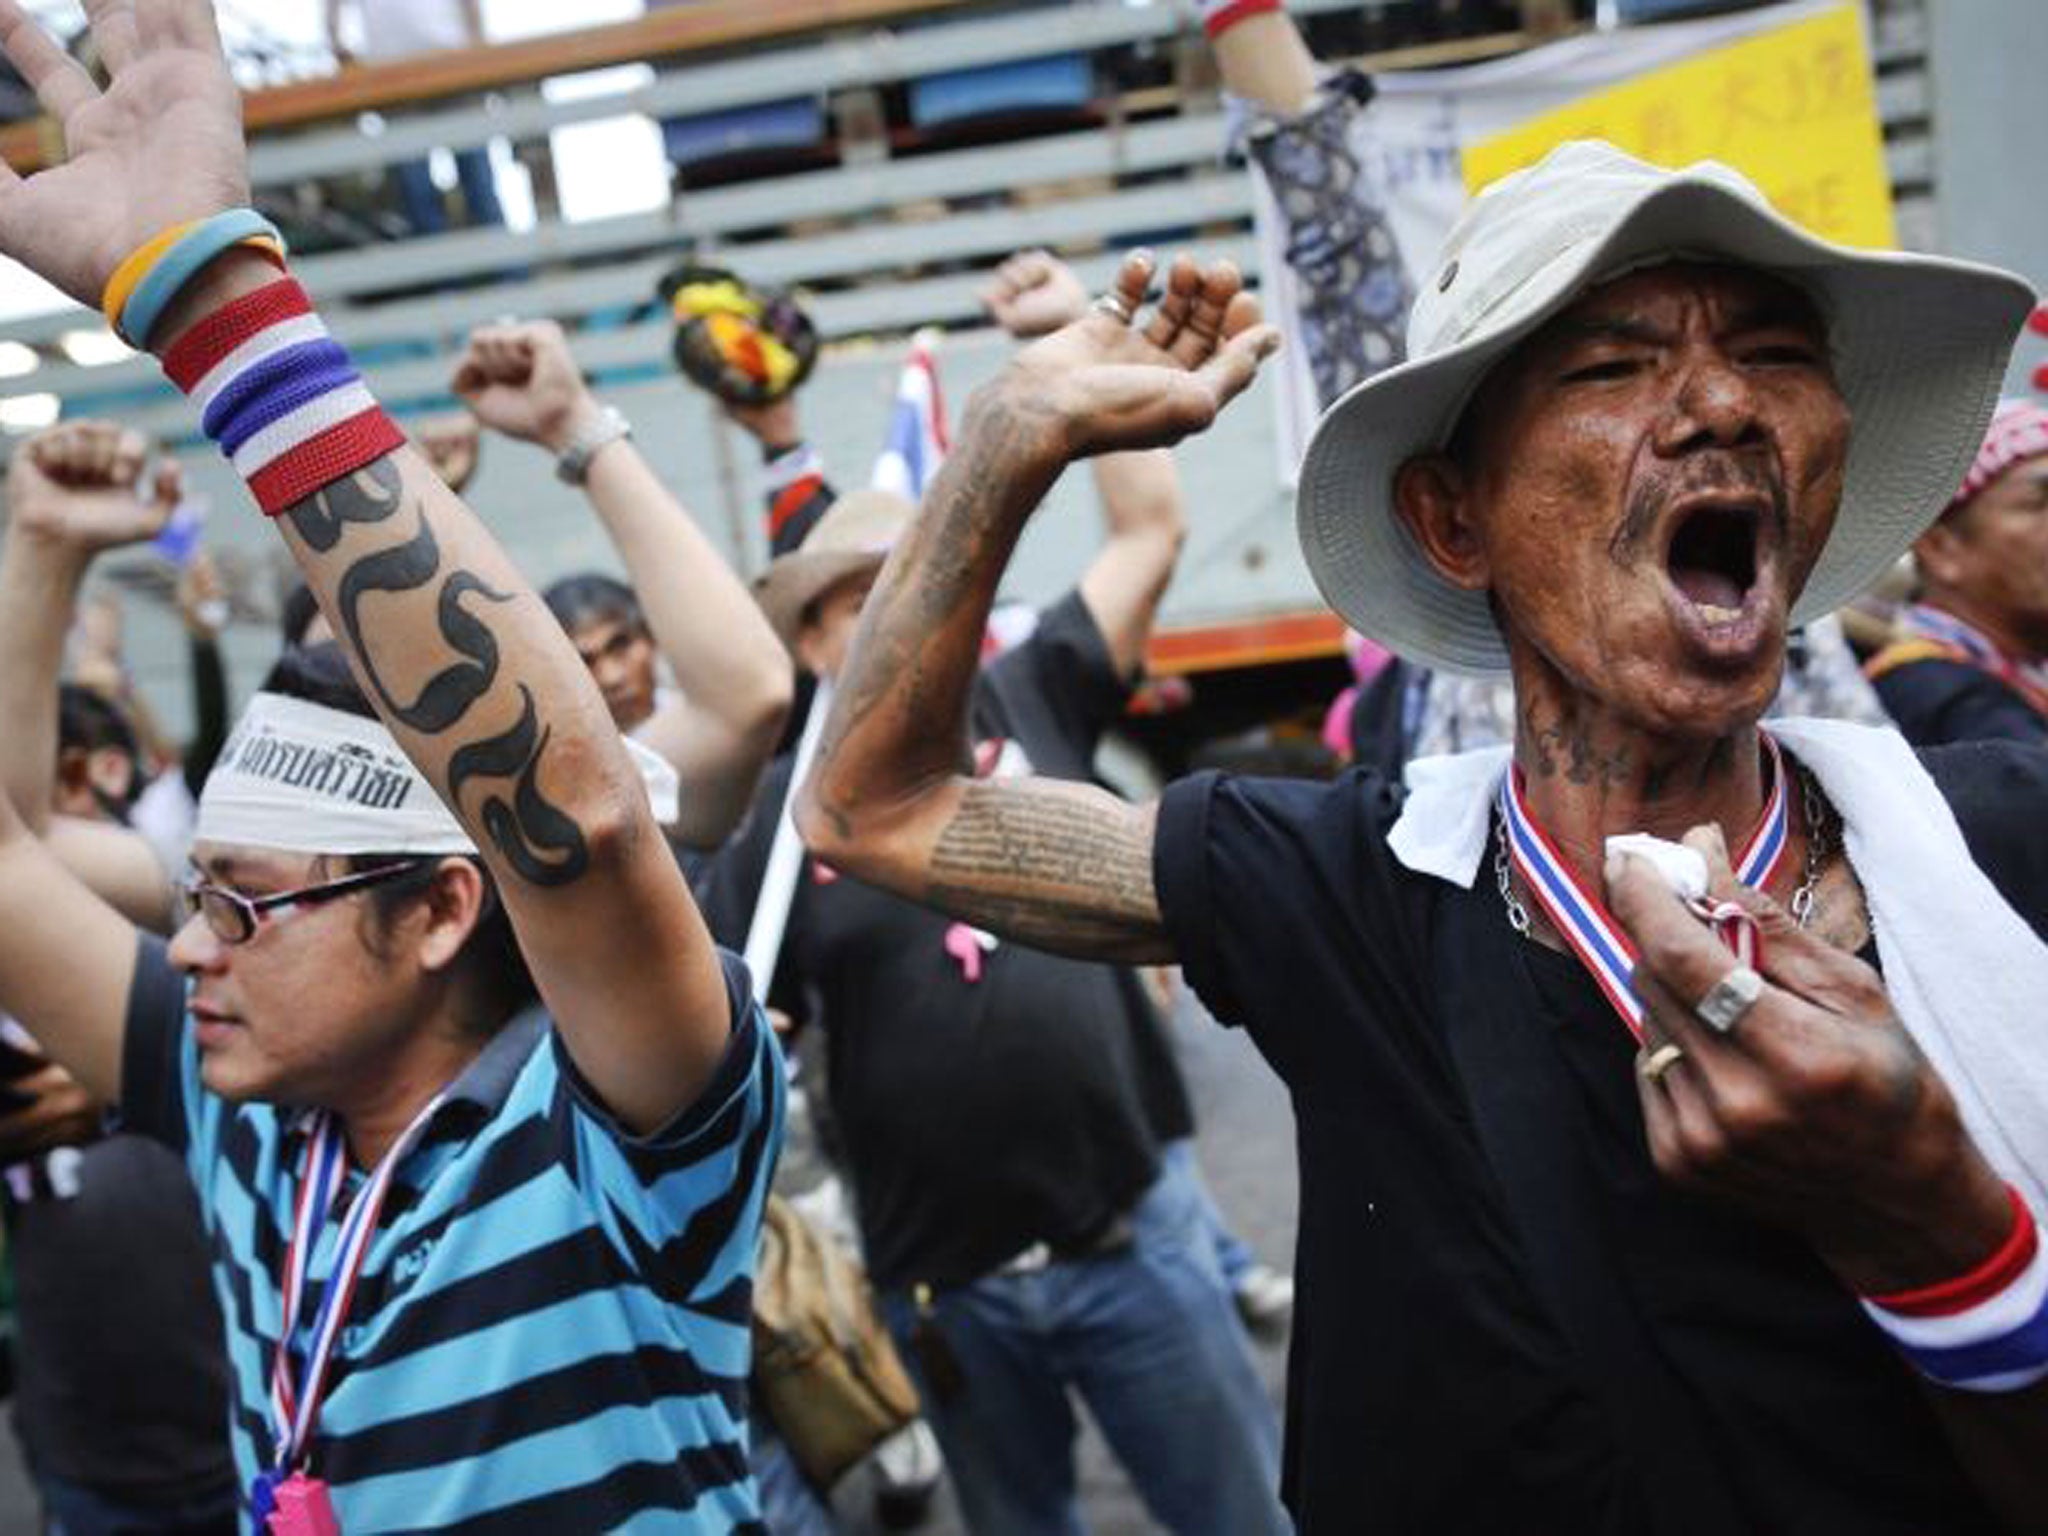 In Thailand's latest round of political turmoil, which has lasted over two months, the PDRC have begun their campaign to occupy key locations in a city-wide shutdown of Bangkok. The PDRC and its supporters aim to derail Thailand's snap-poll scheduled for